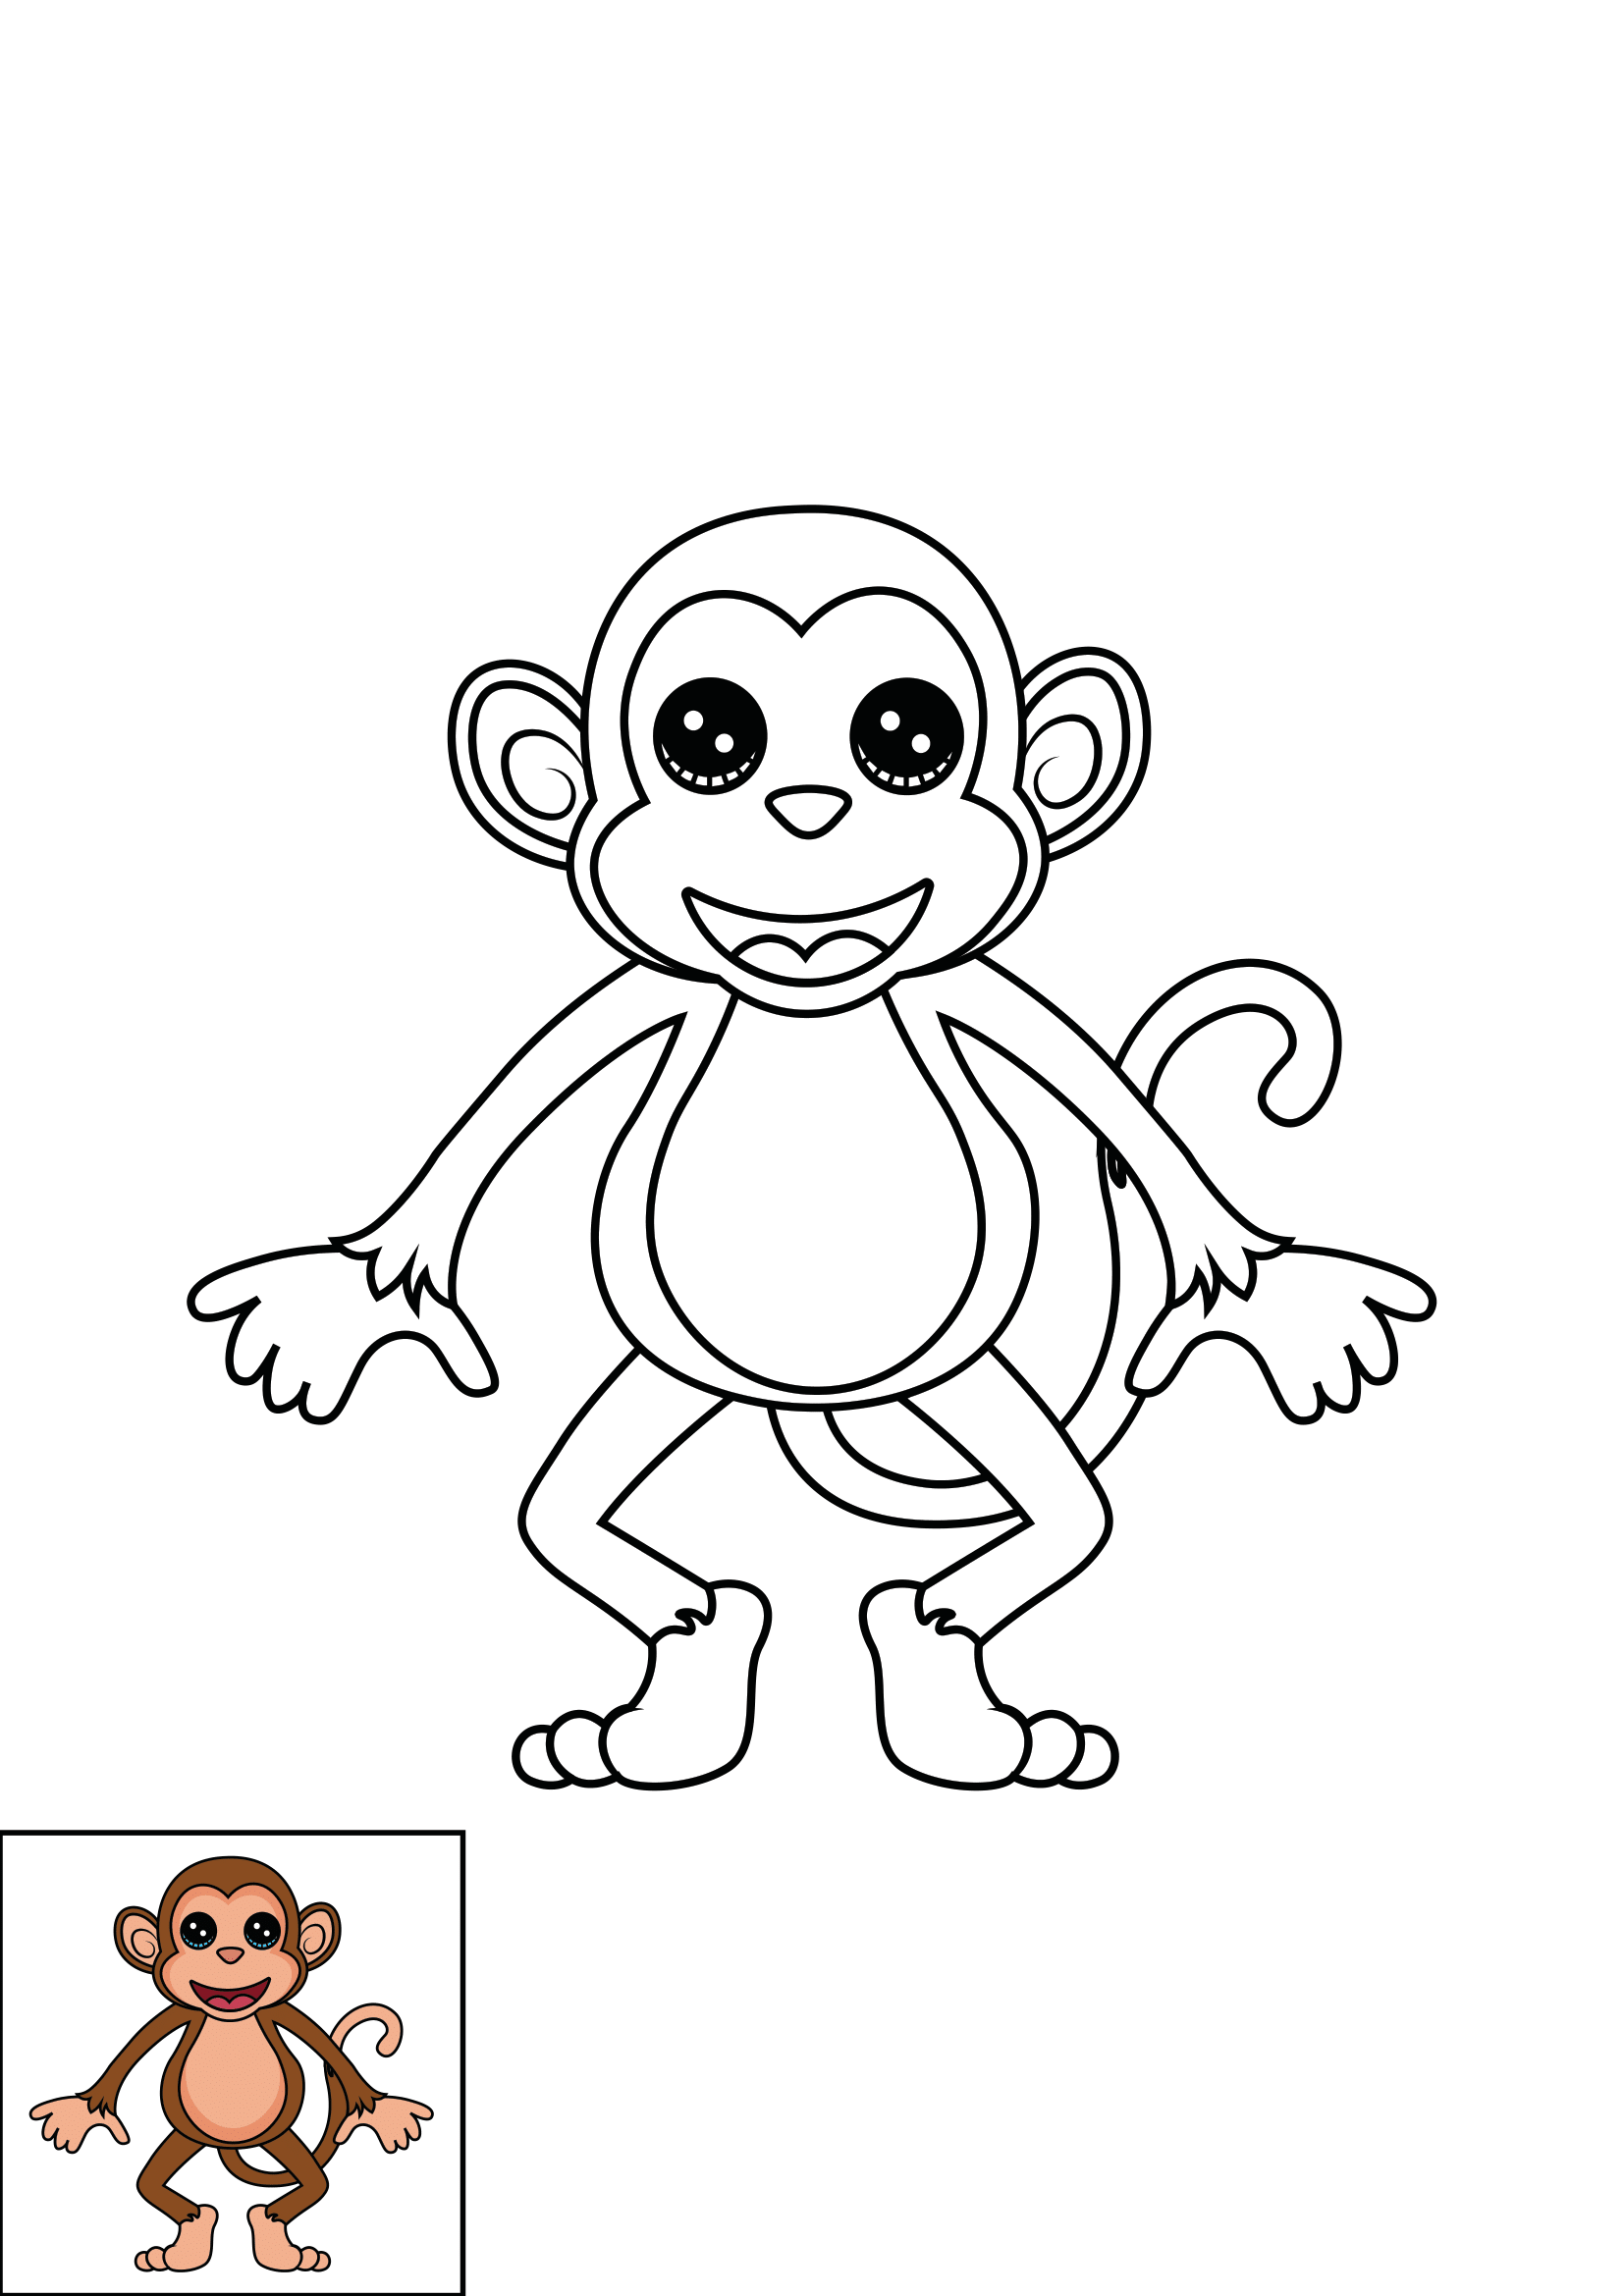 How to Draw A Monkey Step by Step Printable Color